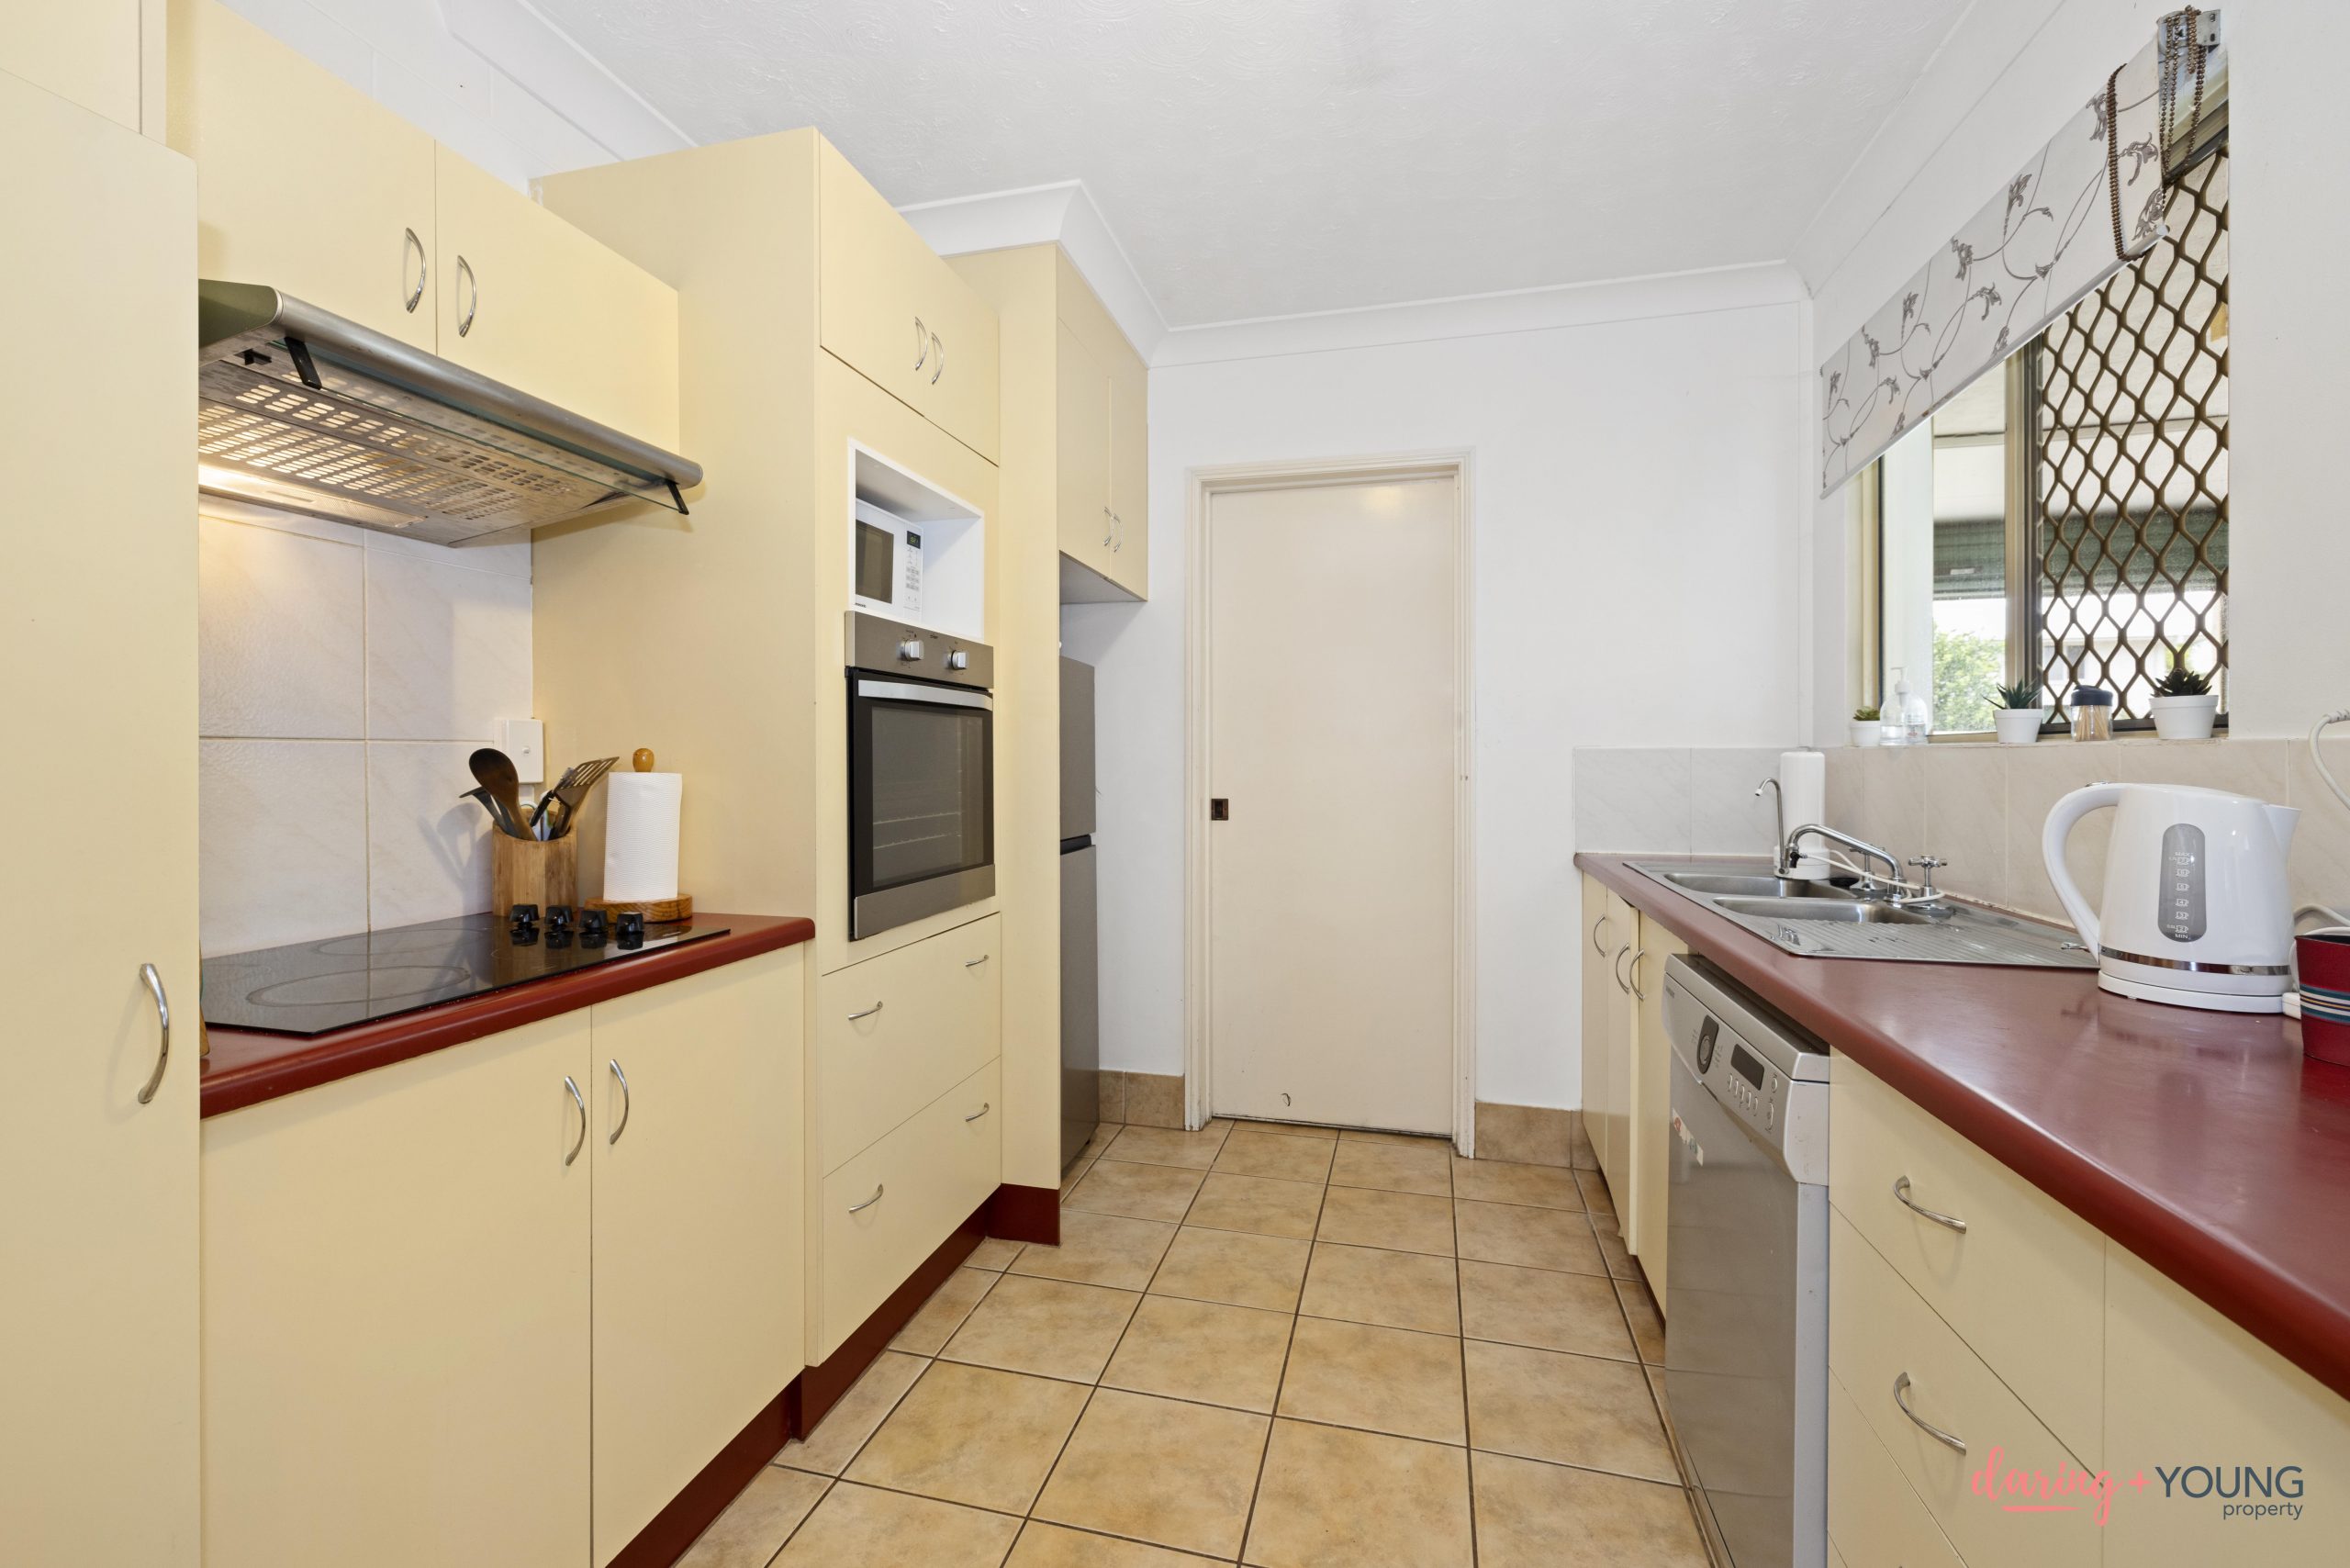 Townhouse with Solar in the heart of Mundingburra …. Great Investment Opportunity!